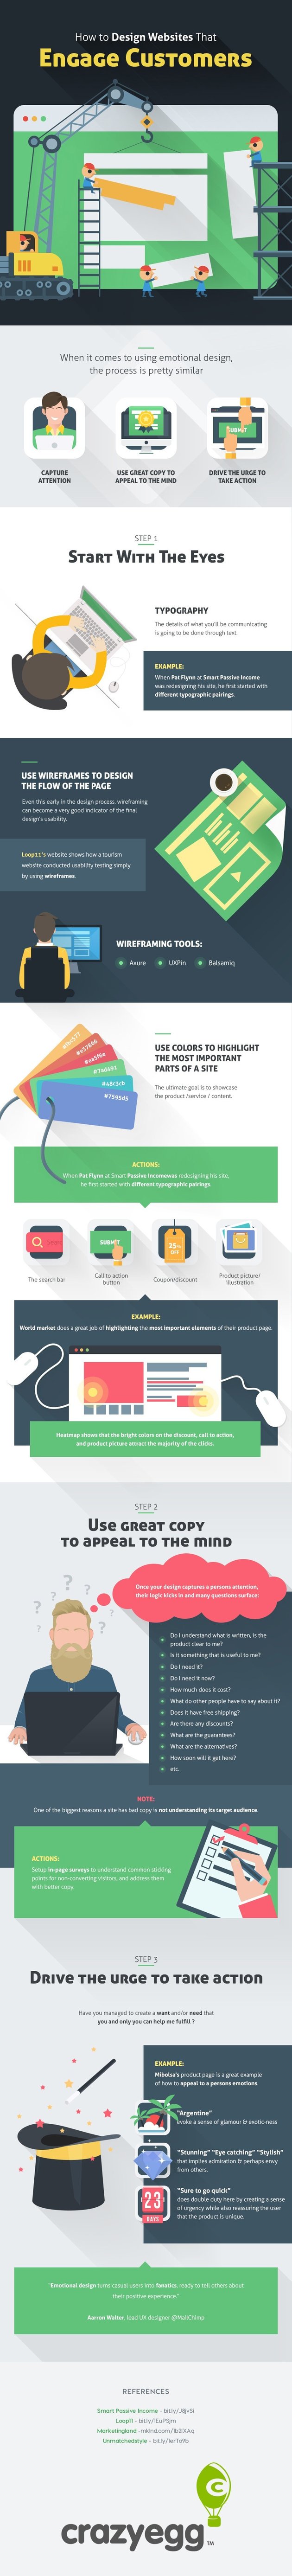 Use Great Website Design to Increase Customer Engagement Infographic image